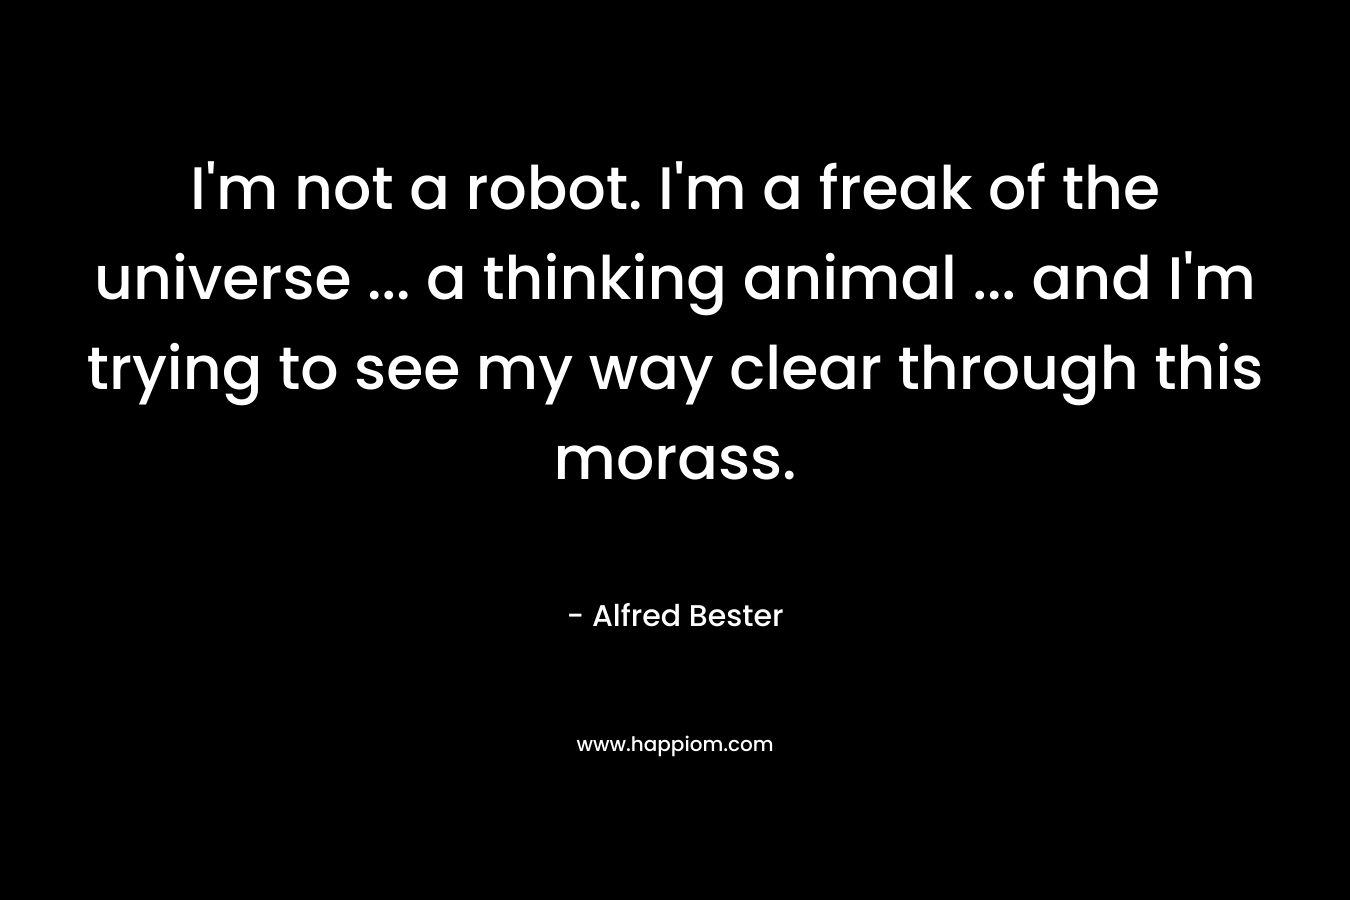 I’m not a robot. I’m a freak of the universe … a thinking animal … and I’m trying to see my way clear through this morass. – Alfred Bester